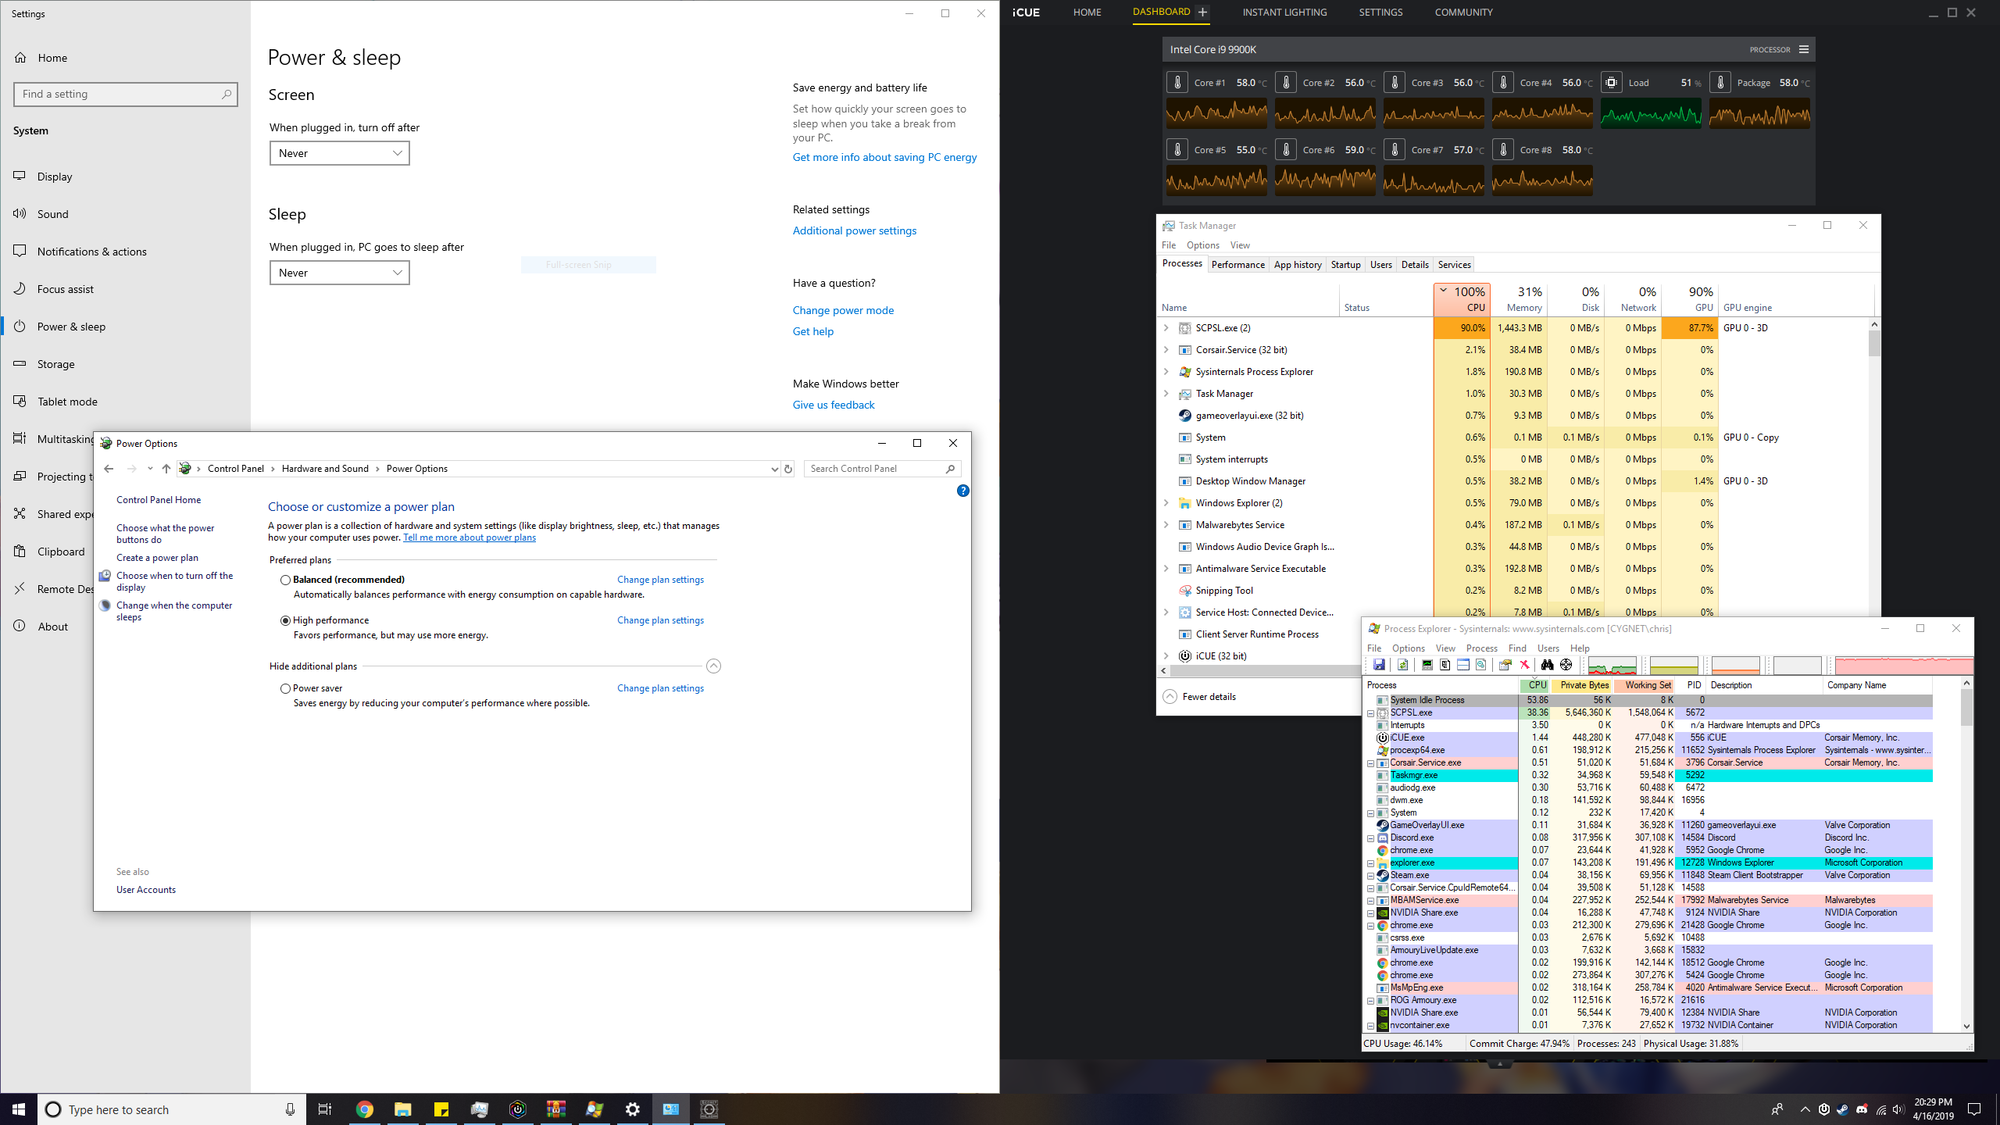 Task Manager reporting 100% CPU Usage ac99c841-4fdf-4a38-8c7d-afc5e21c7069?upload=true.png